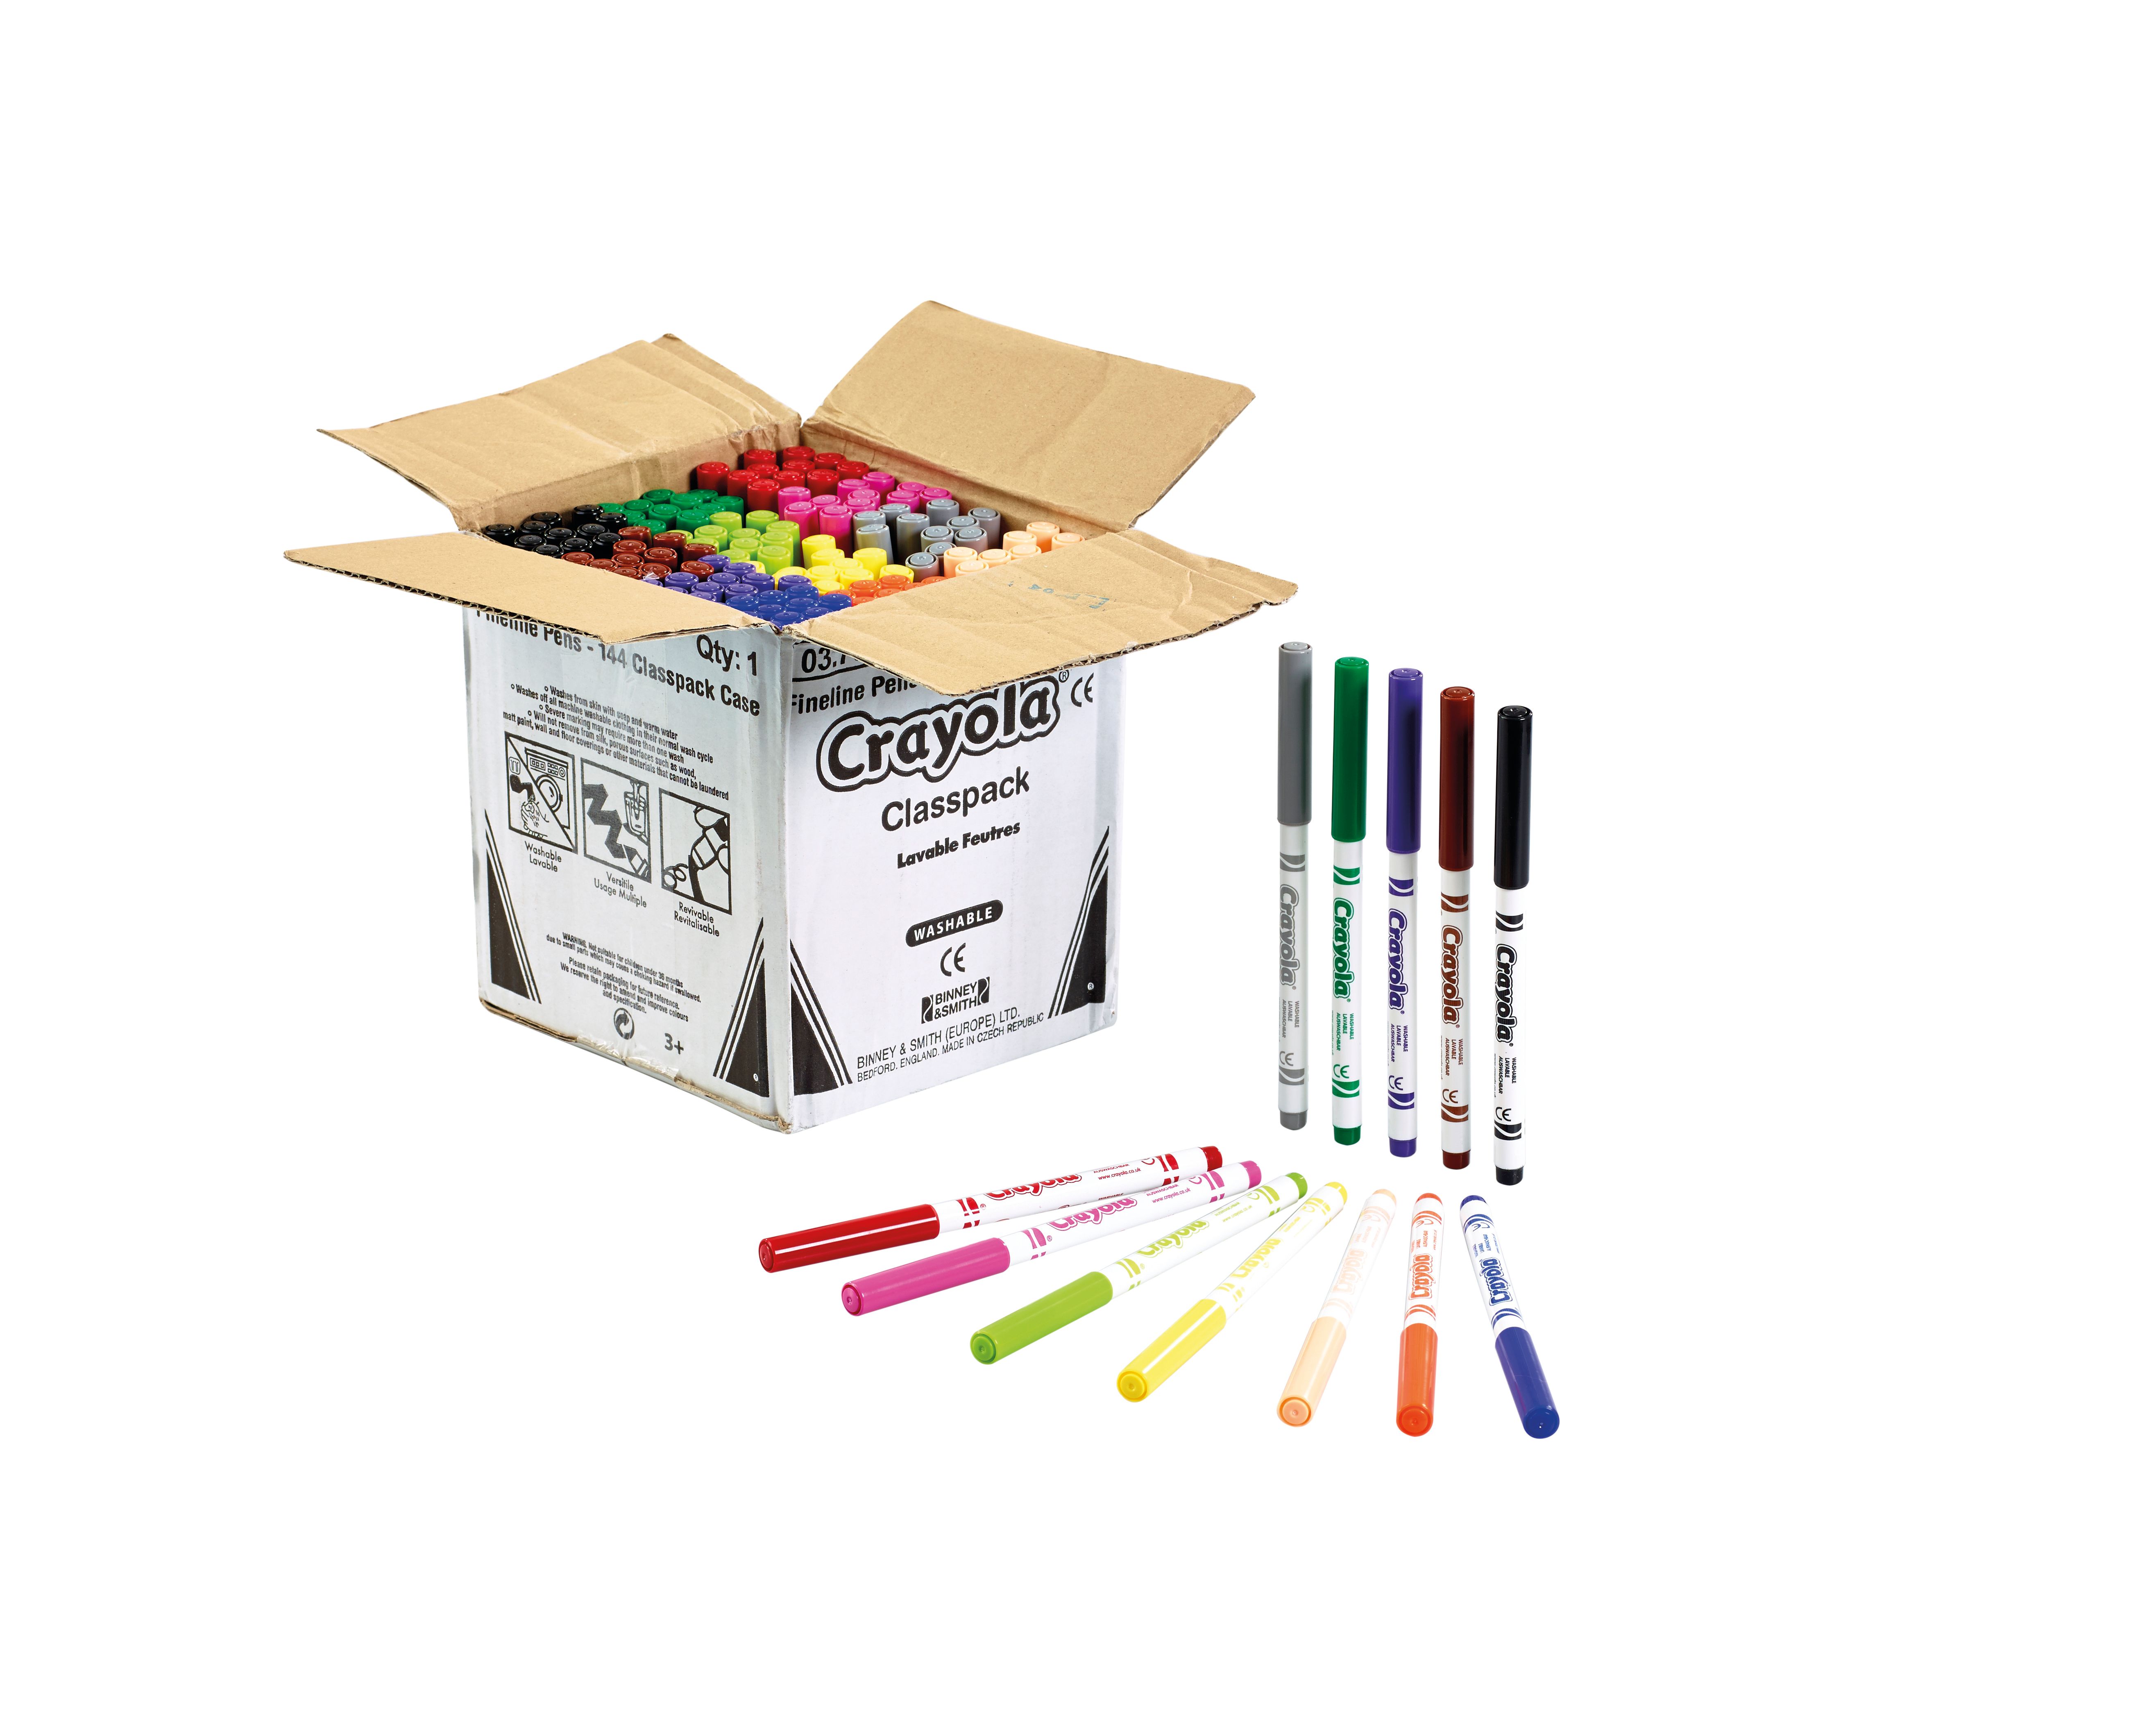 HC355790 - Crayola Supertips Colouring Pens - Pack of 144